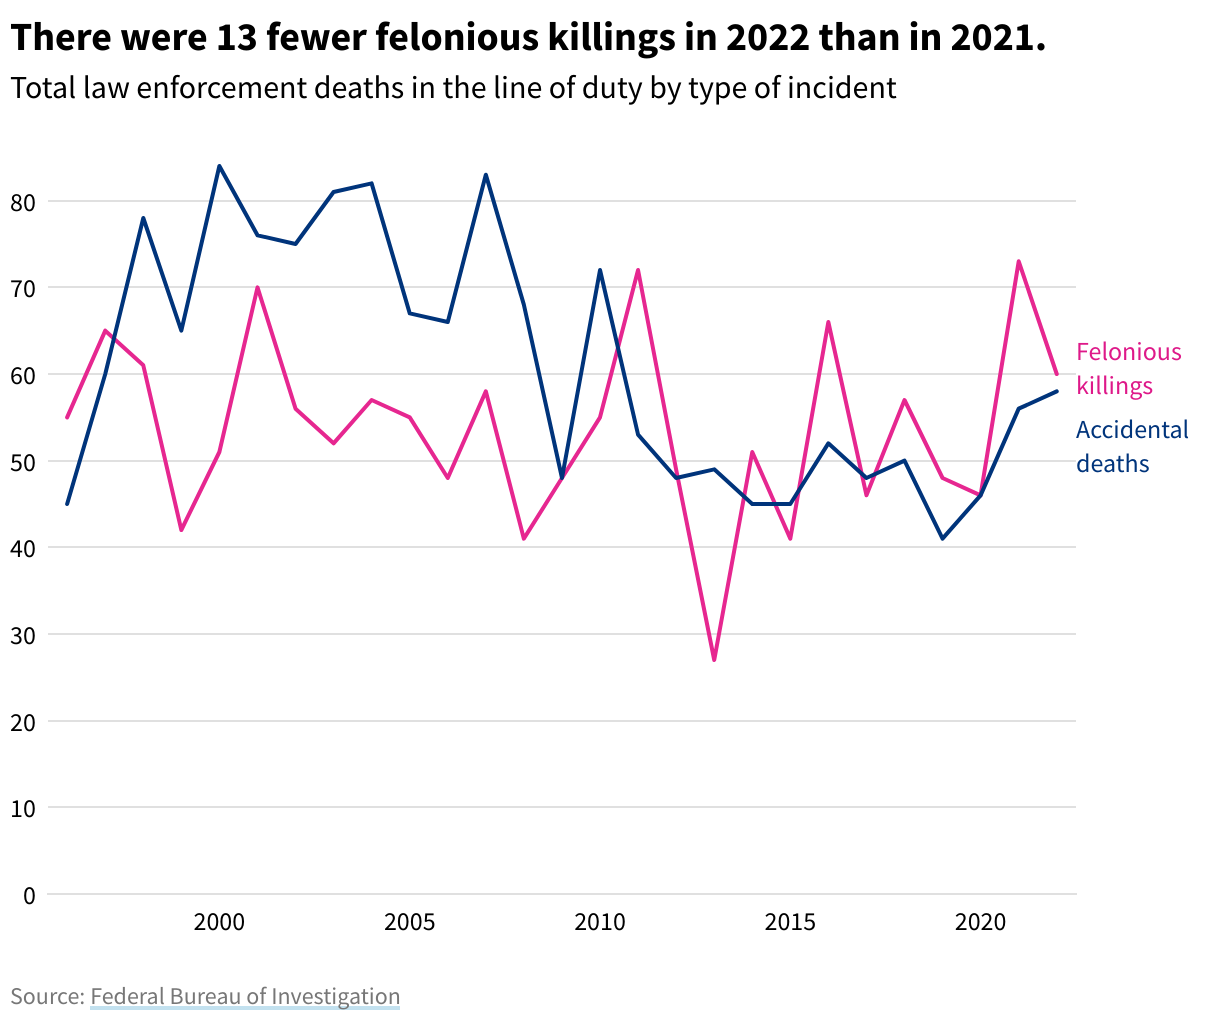 Line chart of total law enforcement officer deaths in the line of duty from 1996 to 2022, broken down into felonious killings and accidental deaths. In 2022, 60 officers were killed feloniously and 58 died of accidental causes.